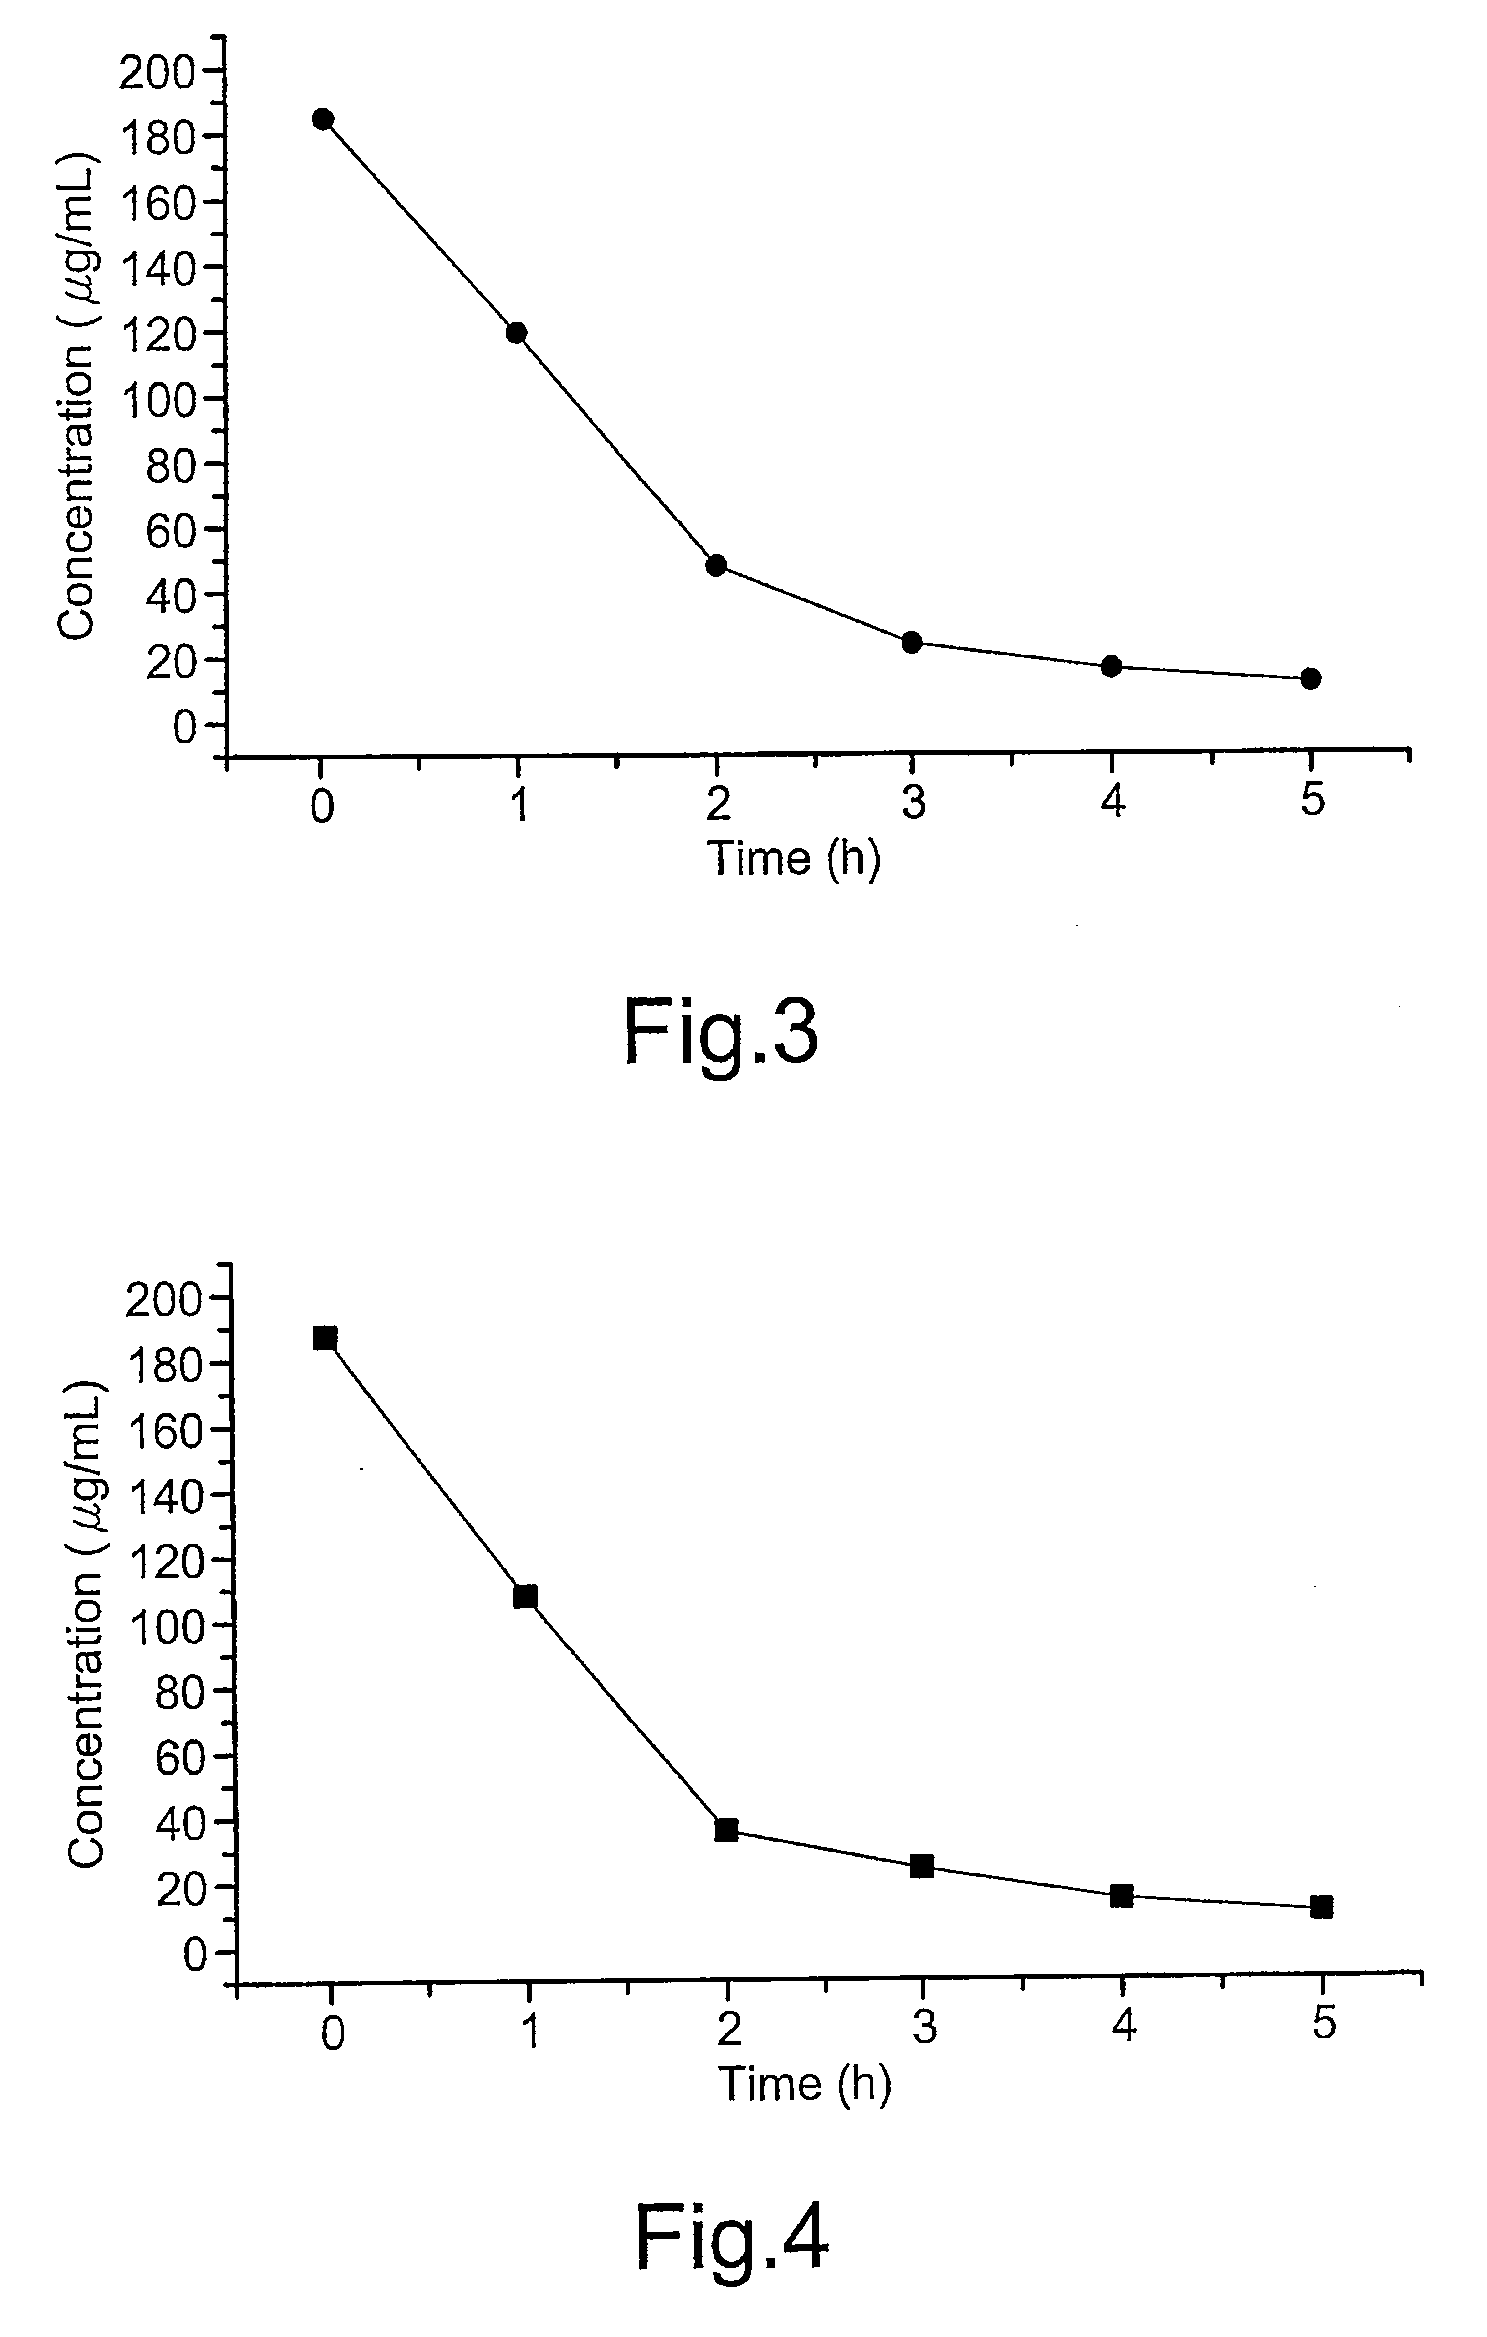 Method for formation of a stationary phase in an immunoadsorption wall